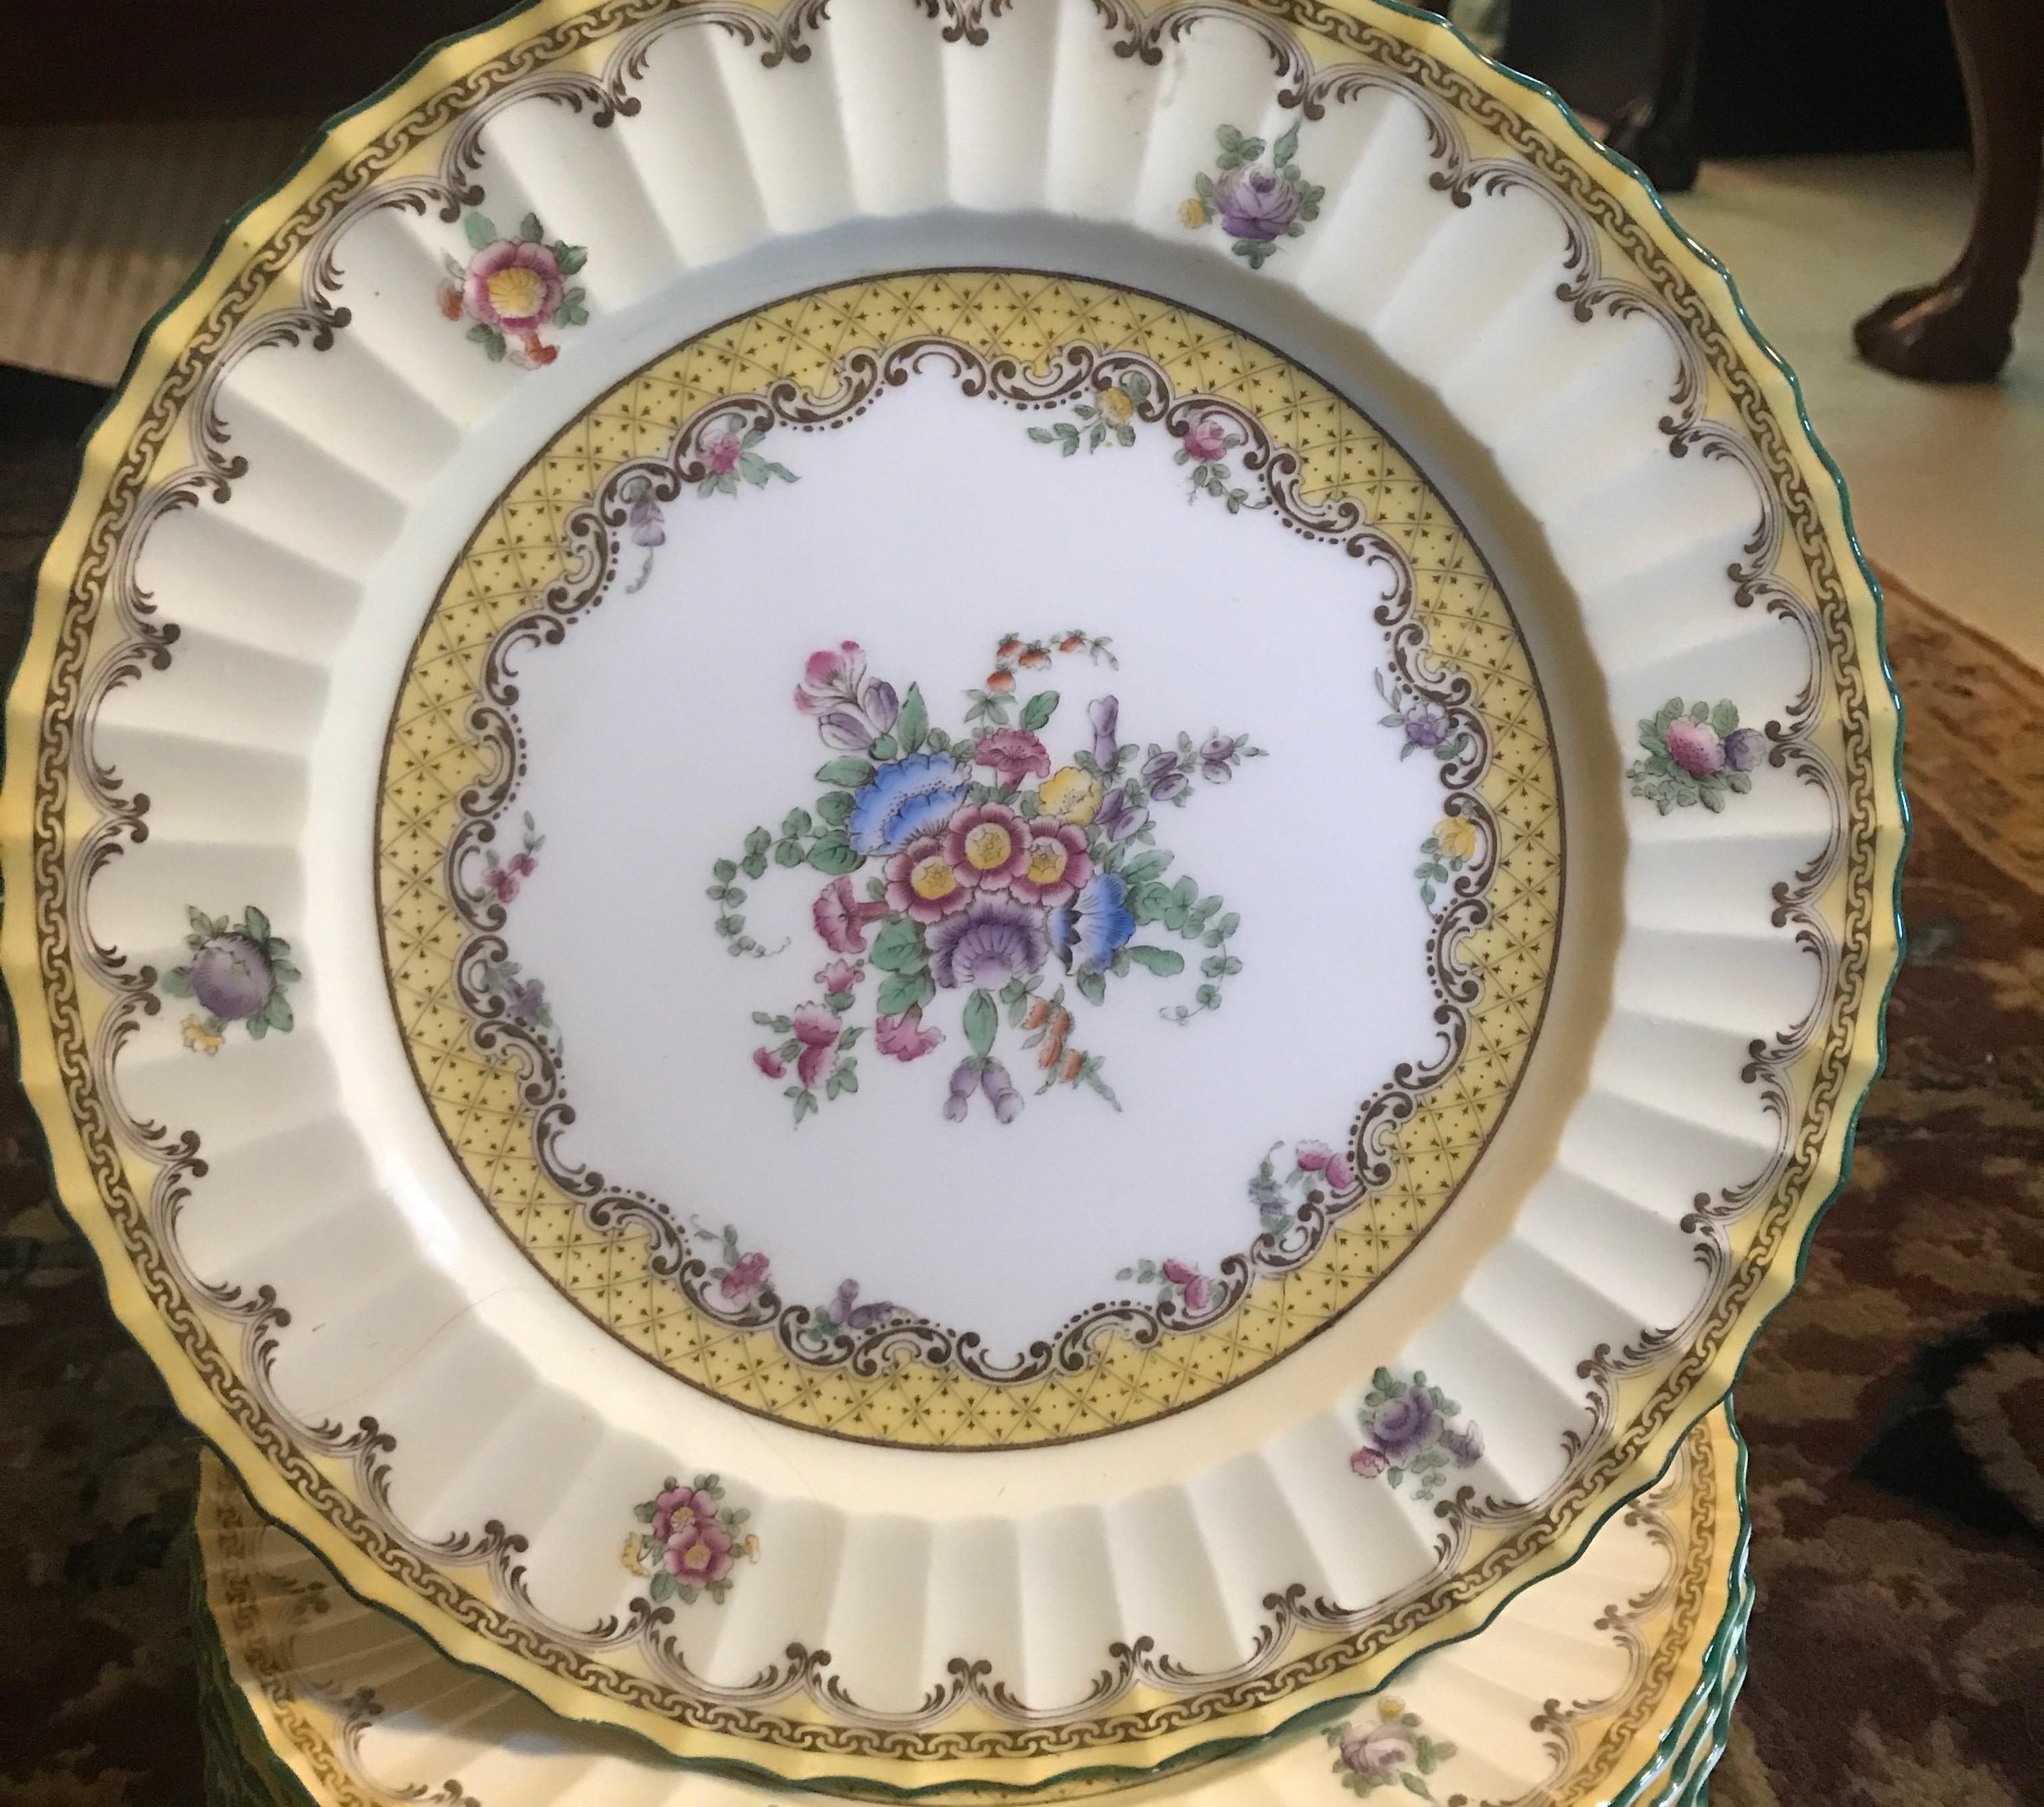 A set of 12 English Royal Worcester floral service plates titled Willoughby. The set was made in the early 1930s and was resurrected from Royal Worcesters pattern from 1770. The same painted decoration and color palette was used on these plates as